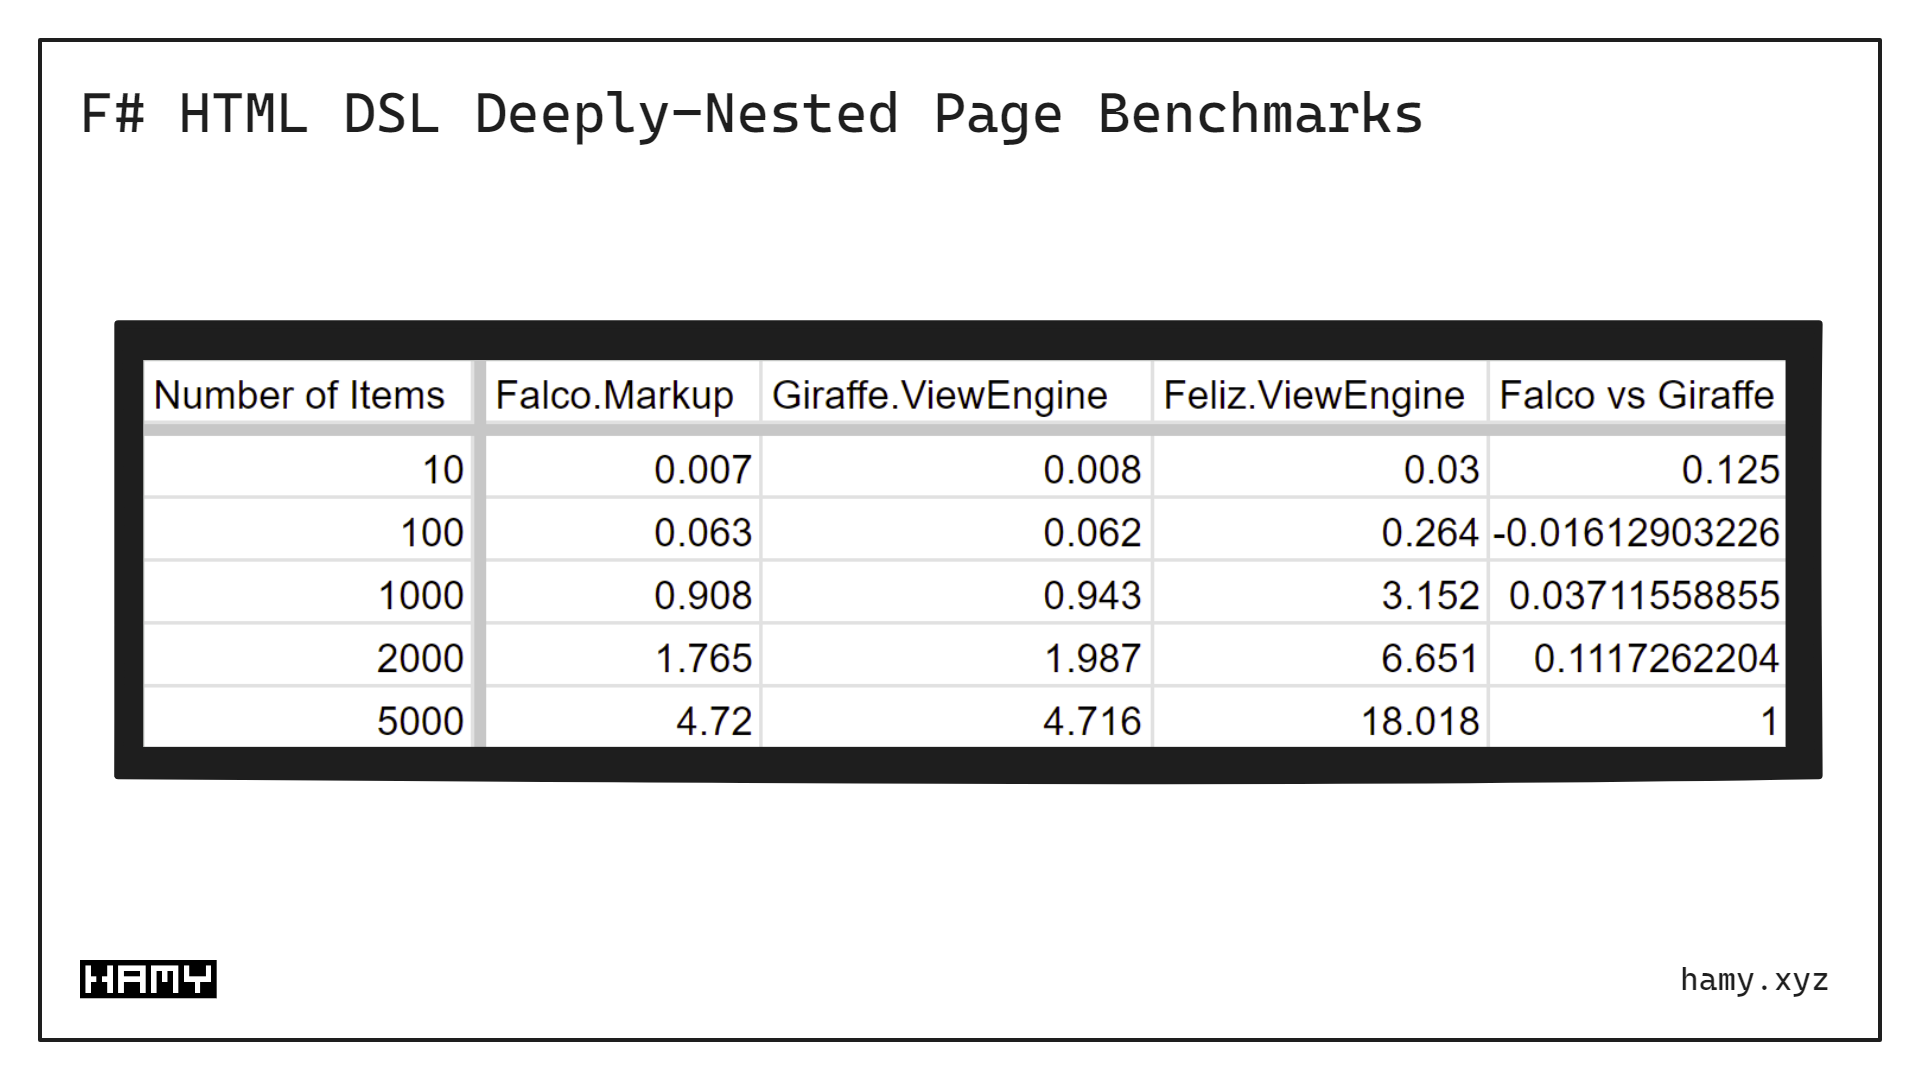 F# HTML DSL Benchmarks - Perf Table